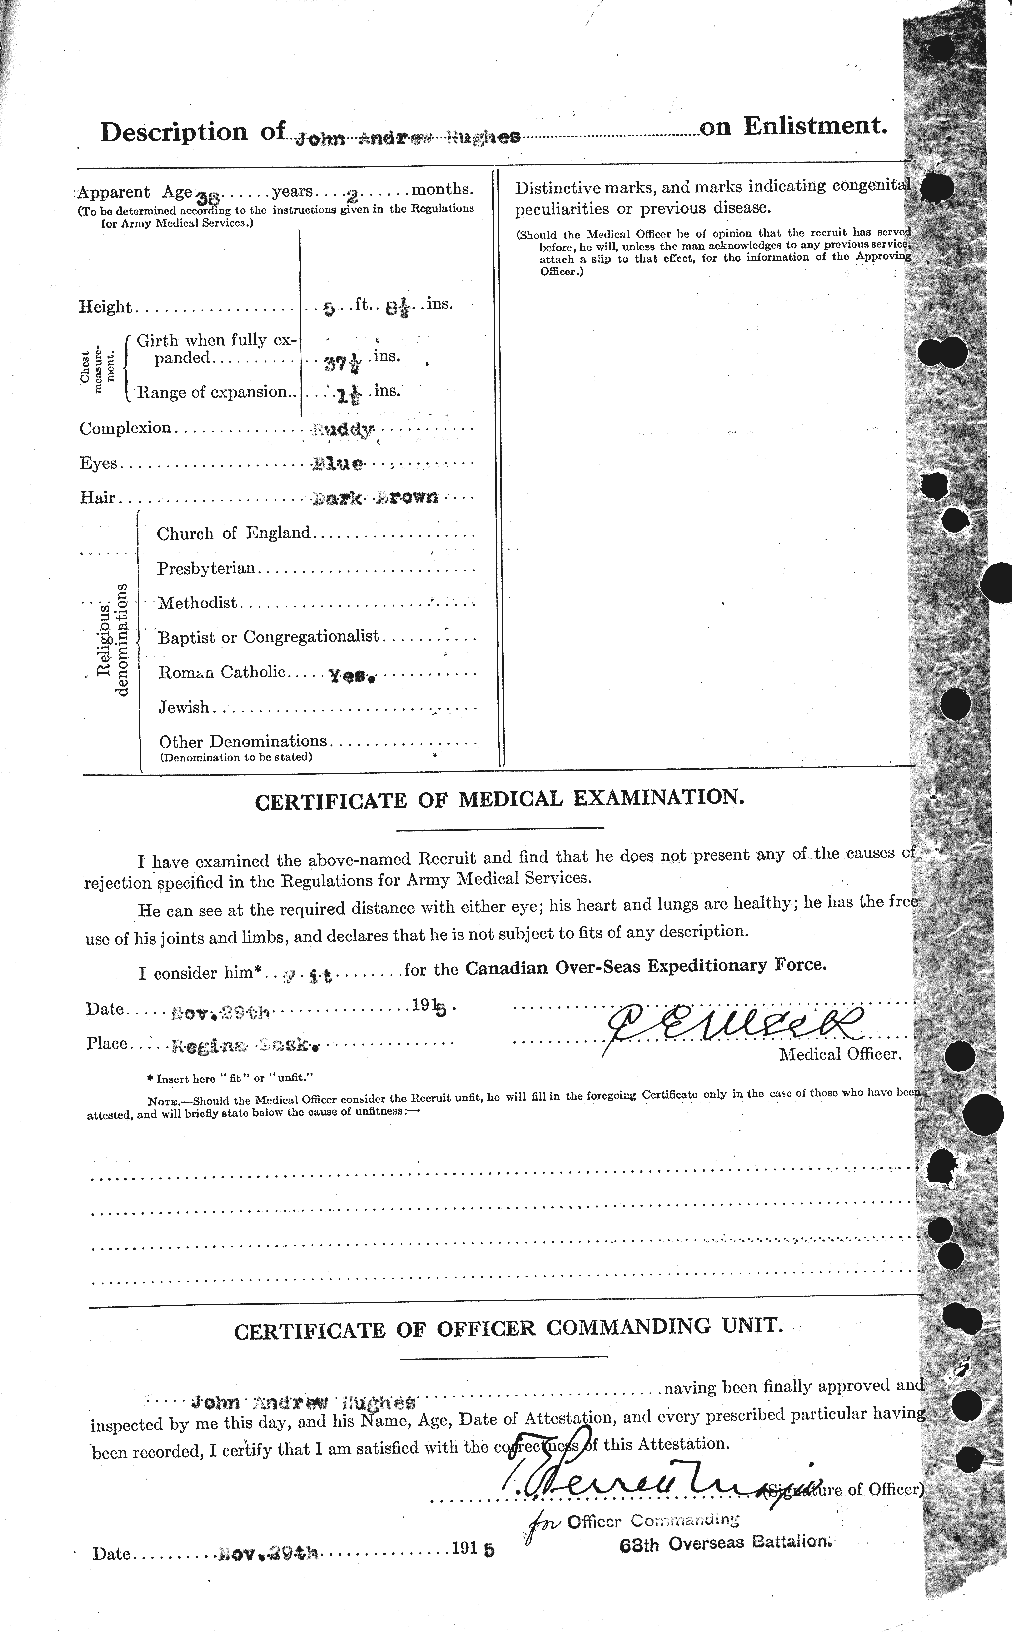 Personnel Records of the First World War - CEF 404007b